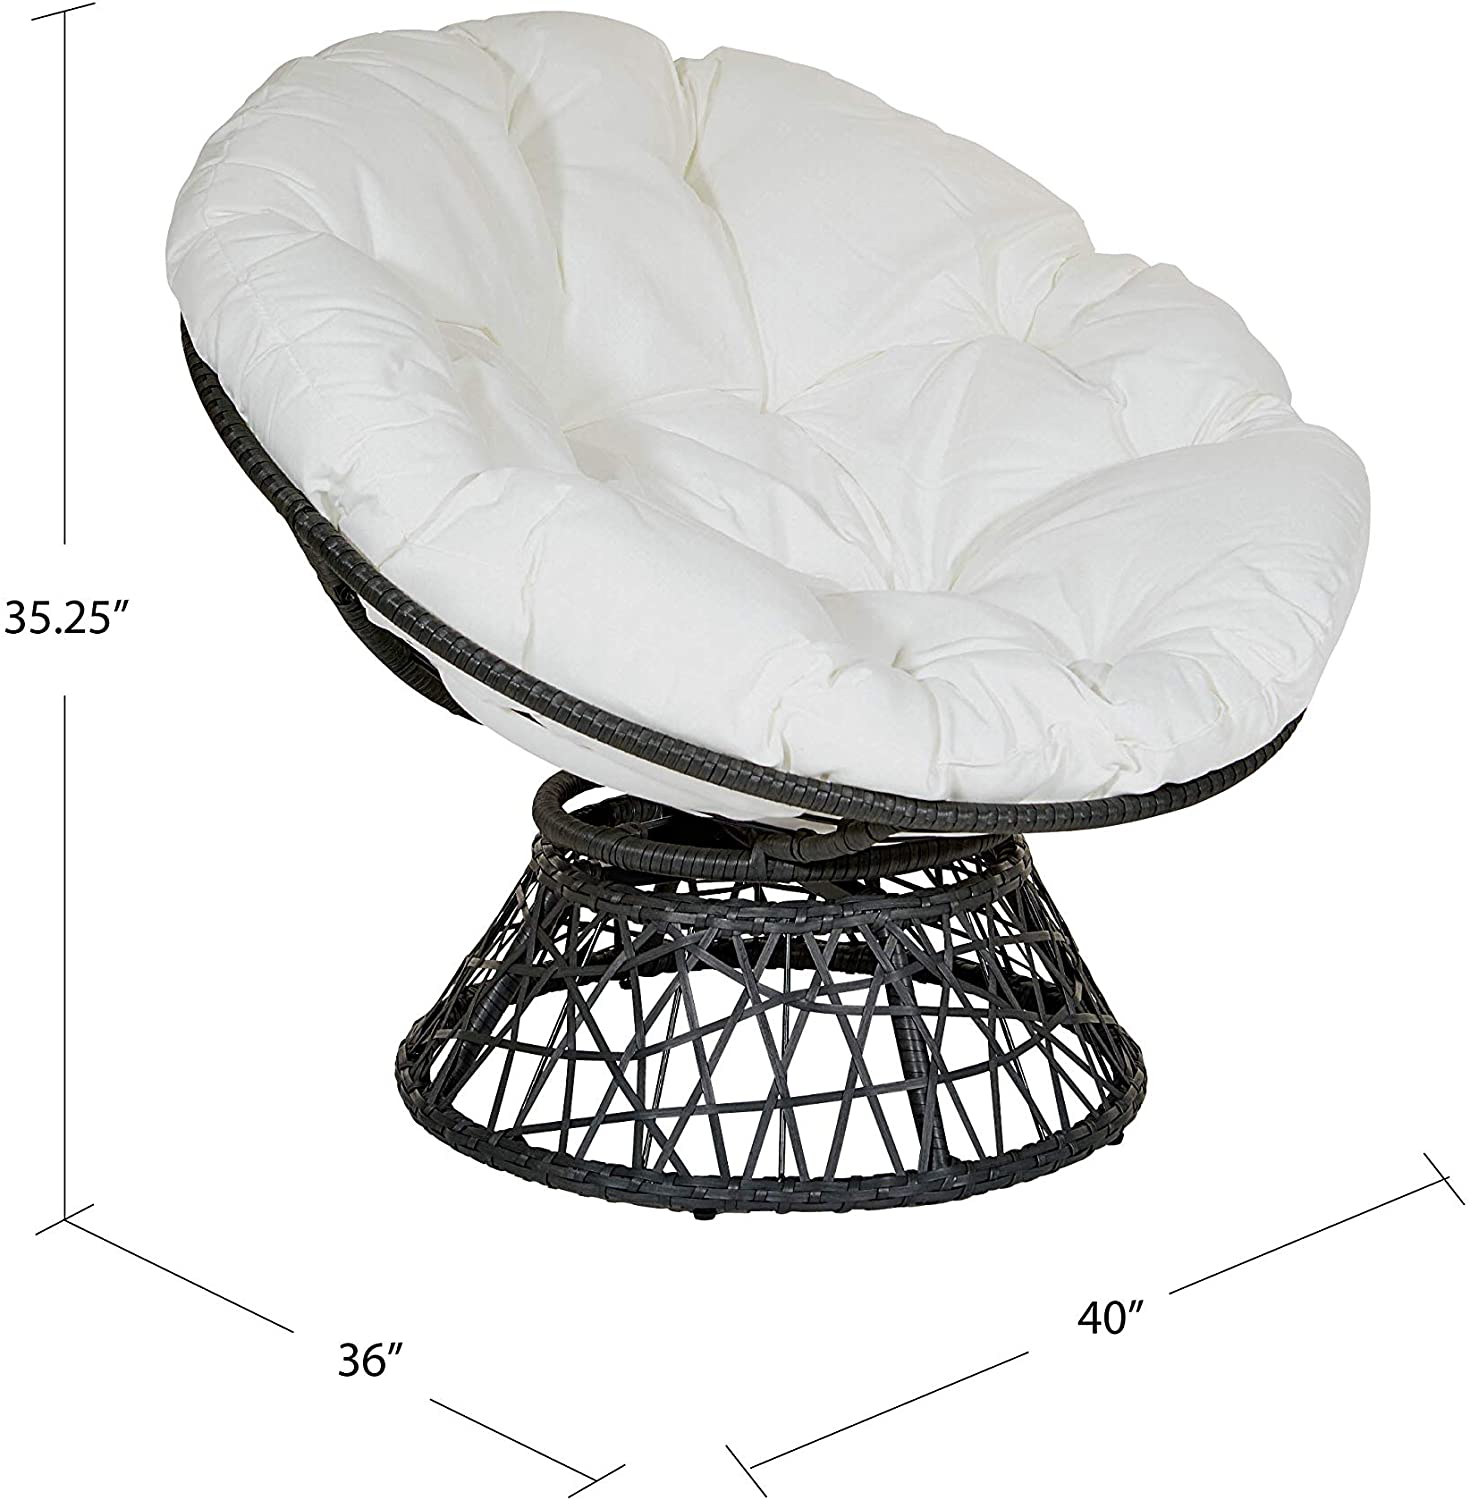 OSP design papasan chair . 15 Unique Furniture Designs for Outdoor Small Spaces - 37